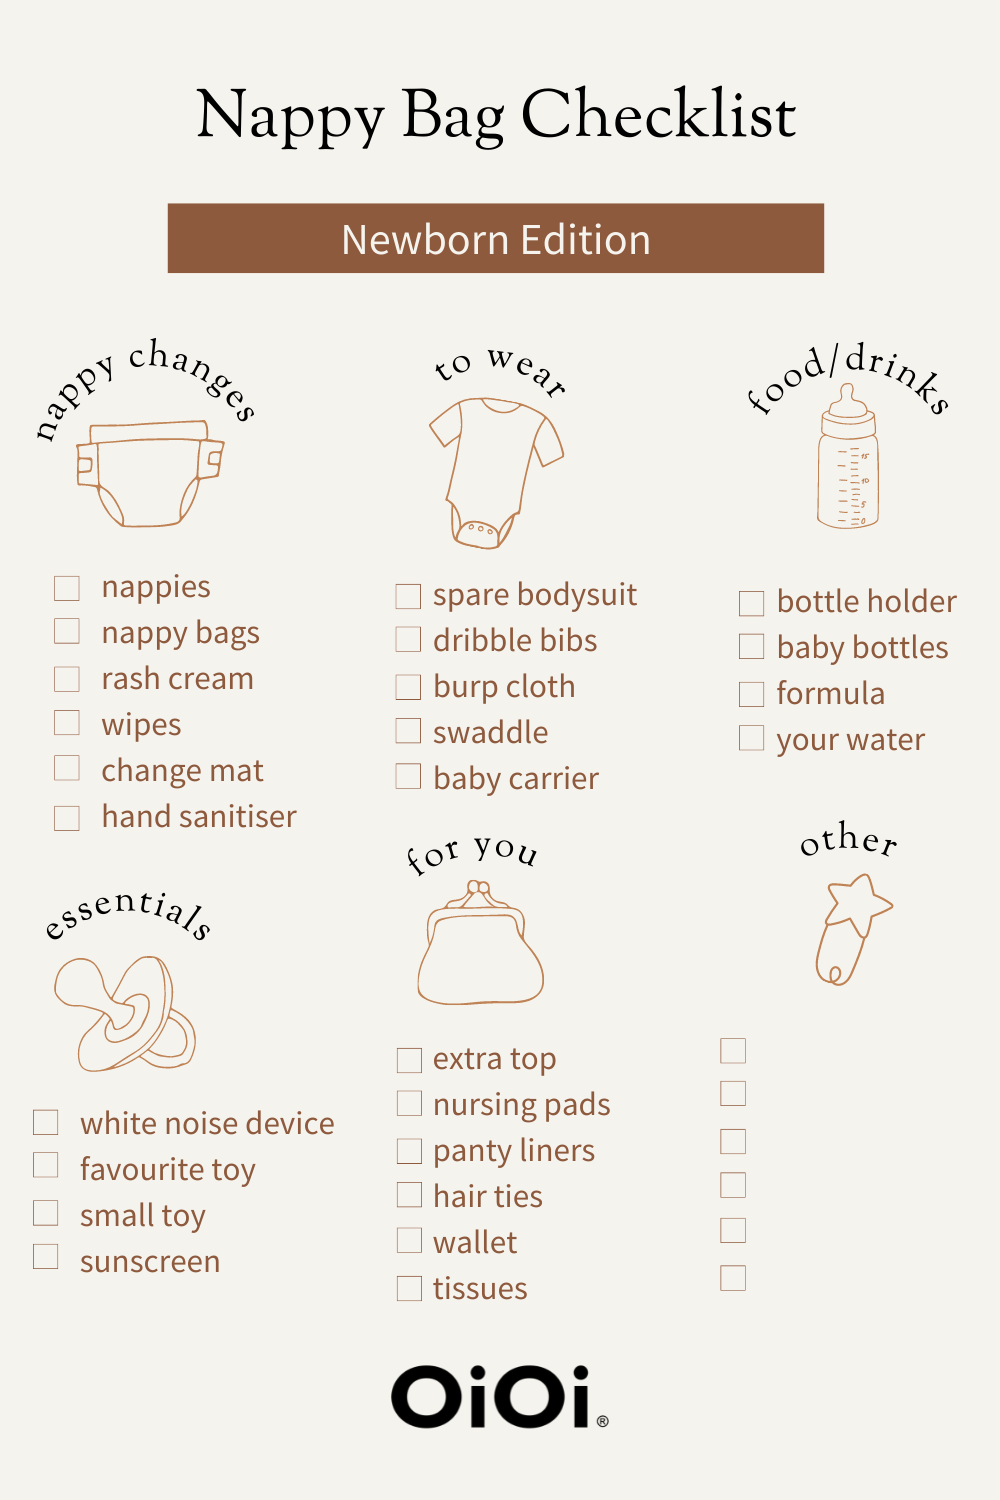 Printable nappy bag checklist infographic showing essential items for baby outings, including diapers, wipes, extra clothes, snacks, toys, sunscreen, and a first aid kit.